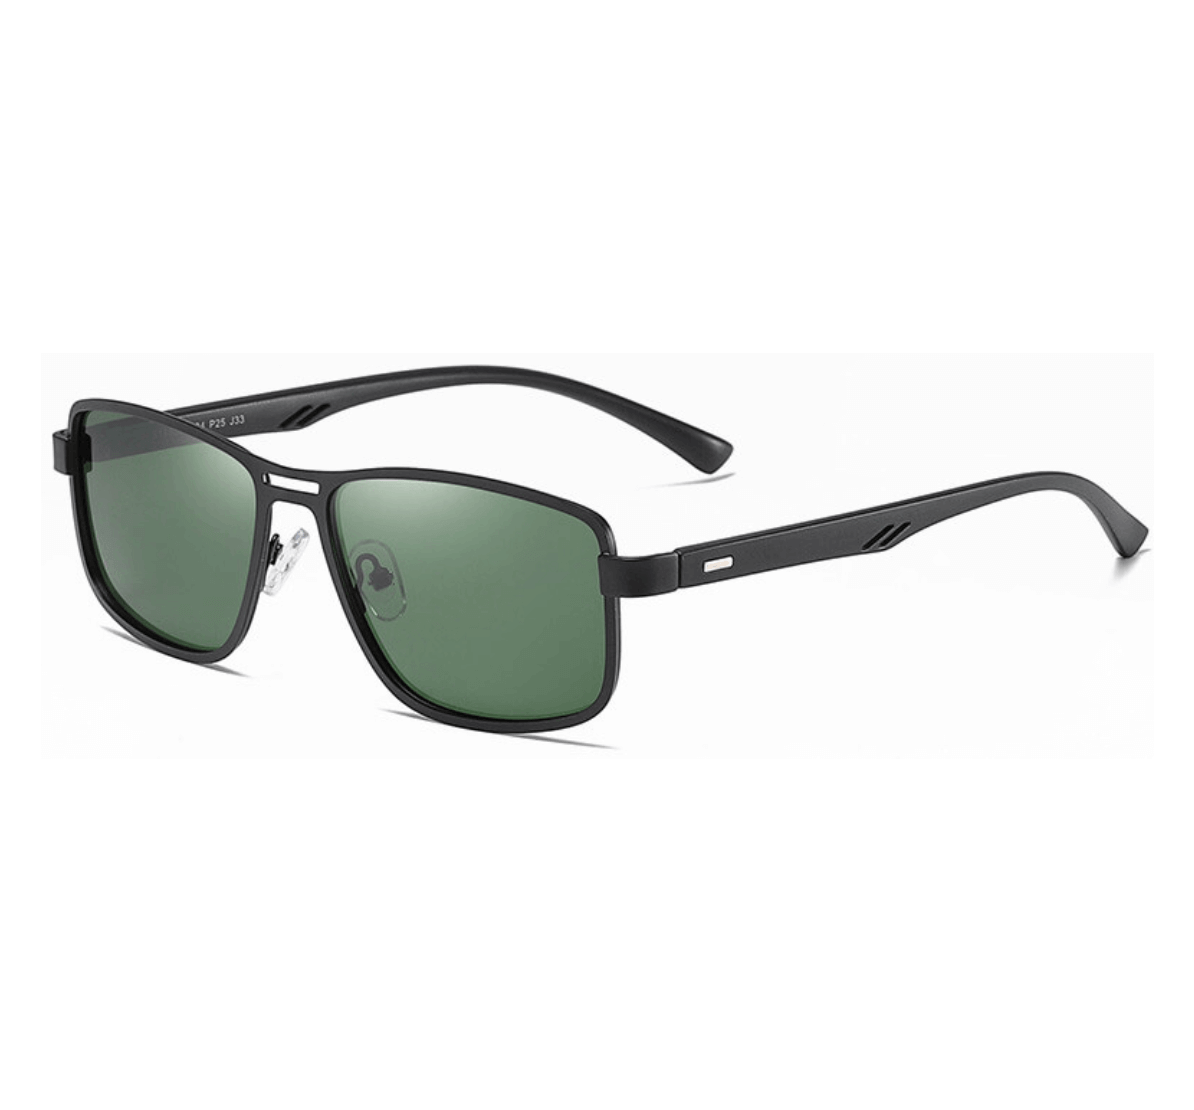 Wholesale Polarized Sunglasses Manufacturer and Supplier in China